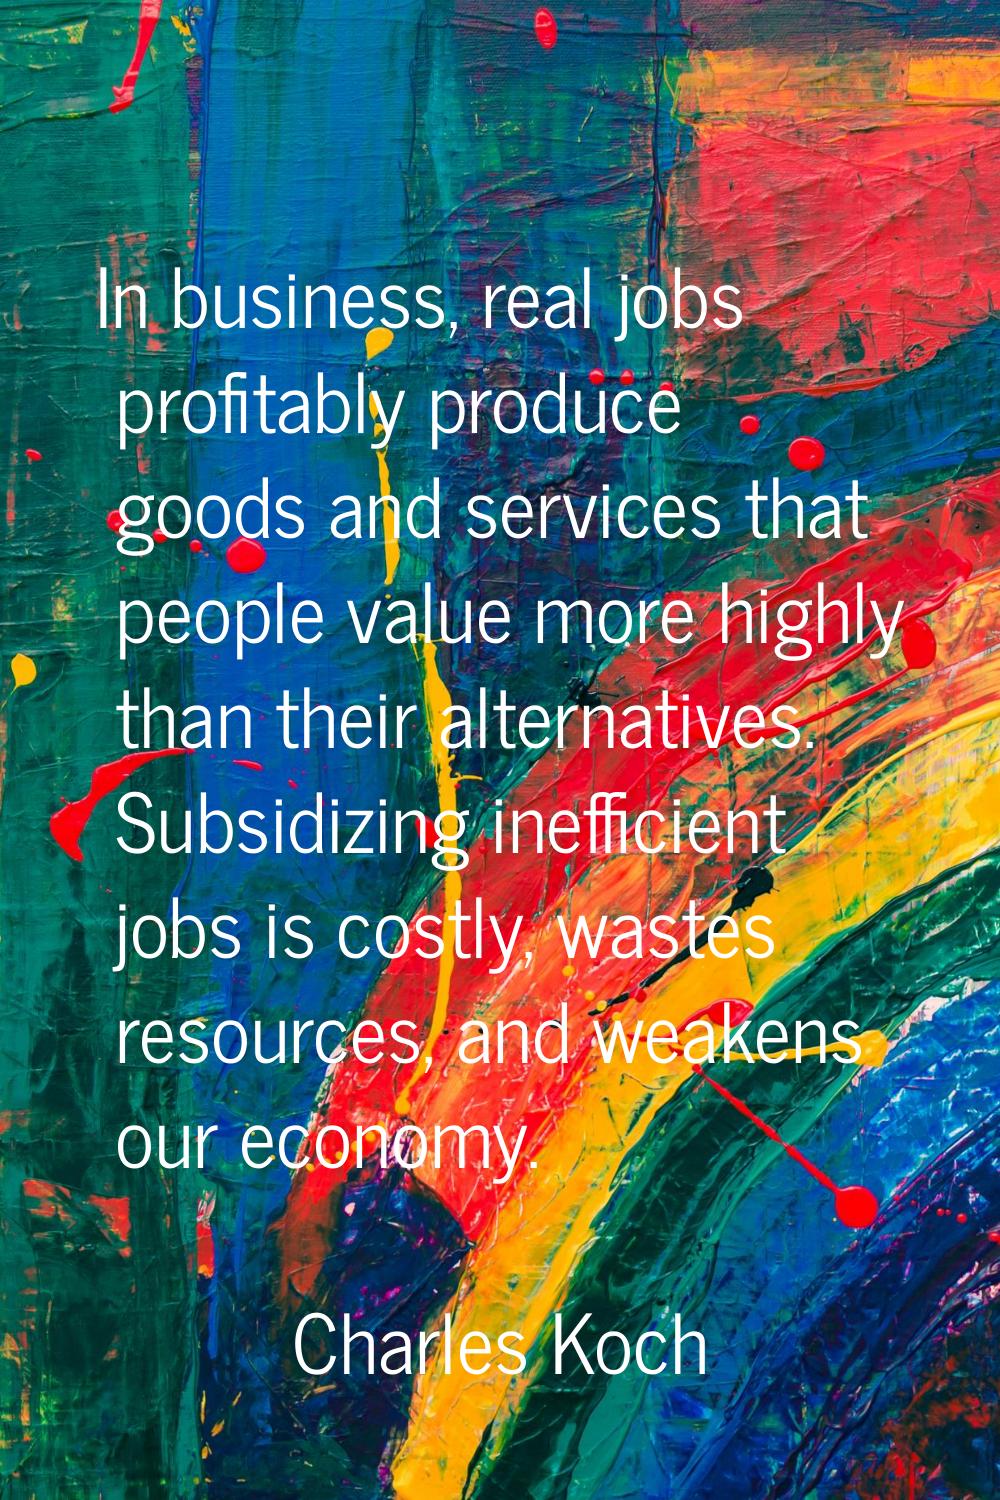 In business, real jobs profitably produce goods and services that people value more highly than the